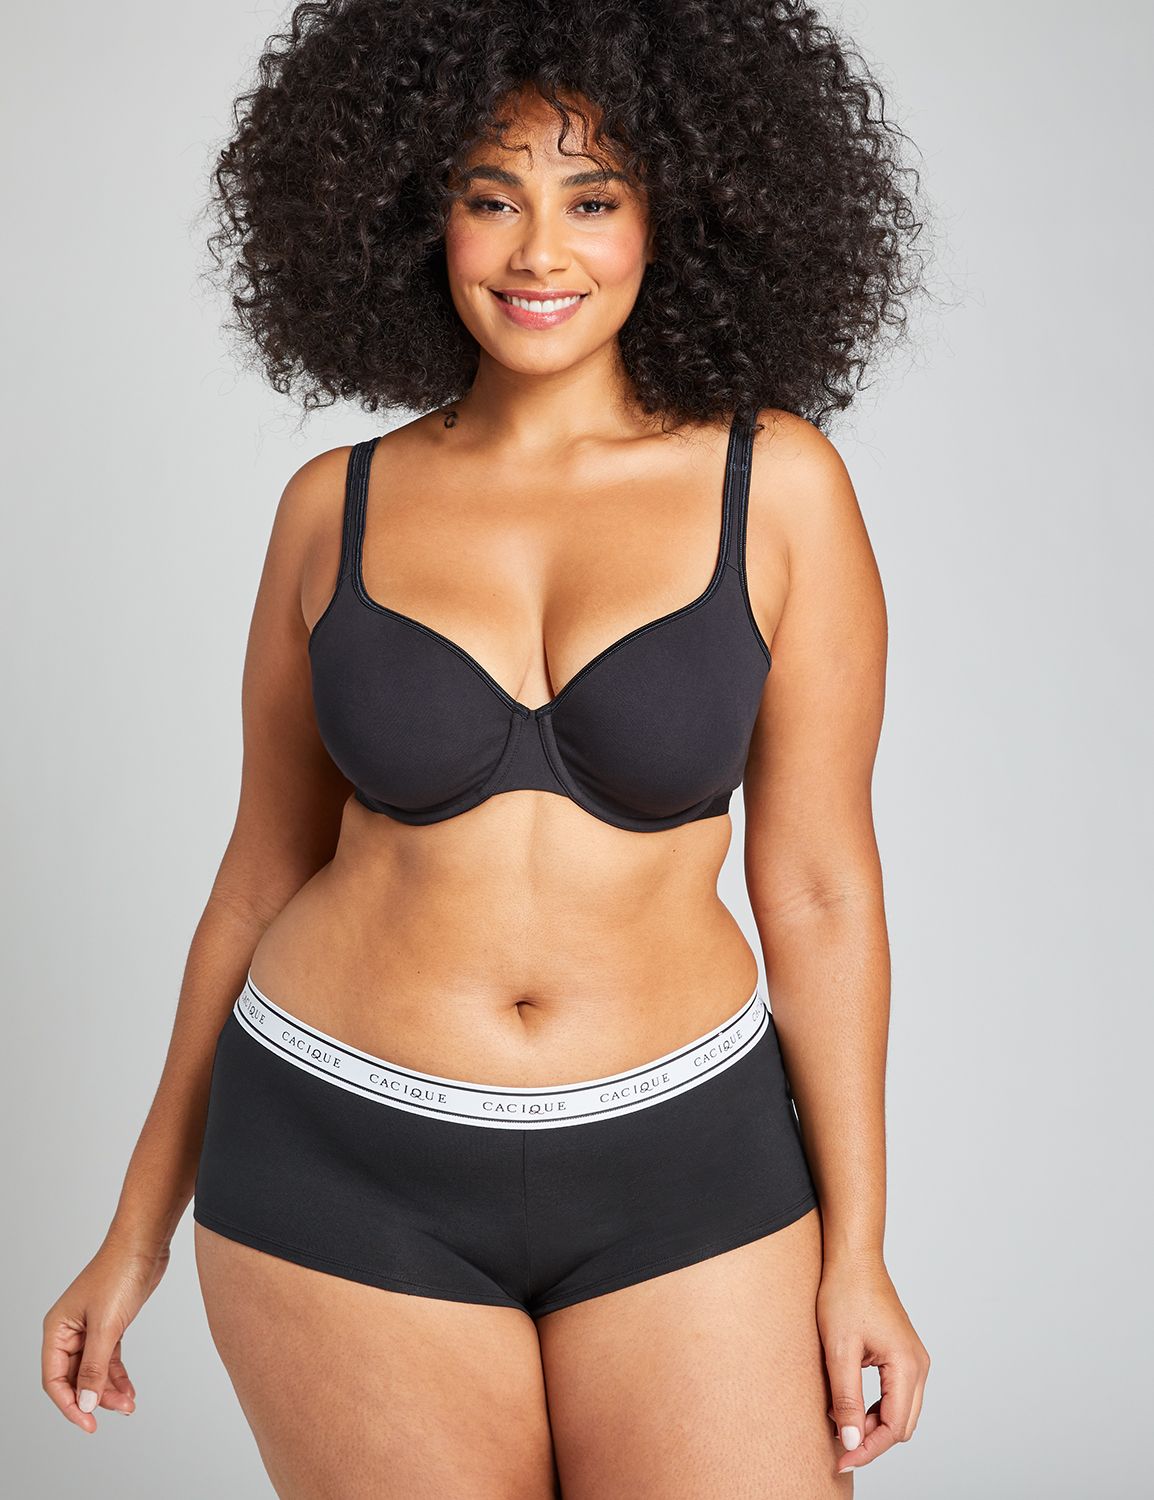 ▷ NEW 18/20 CACIQUE BY LANE BRYANT 5-PACK BLACK & WHITE COTTON FULL BRIEF  PANTIES - CENTRO COMERCIAL CASTELLANA 200 ◁